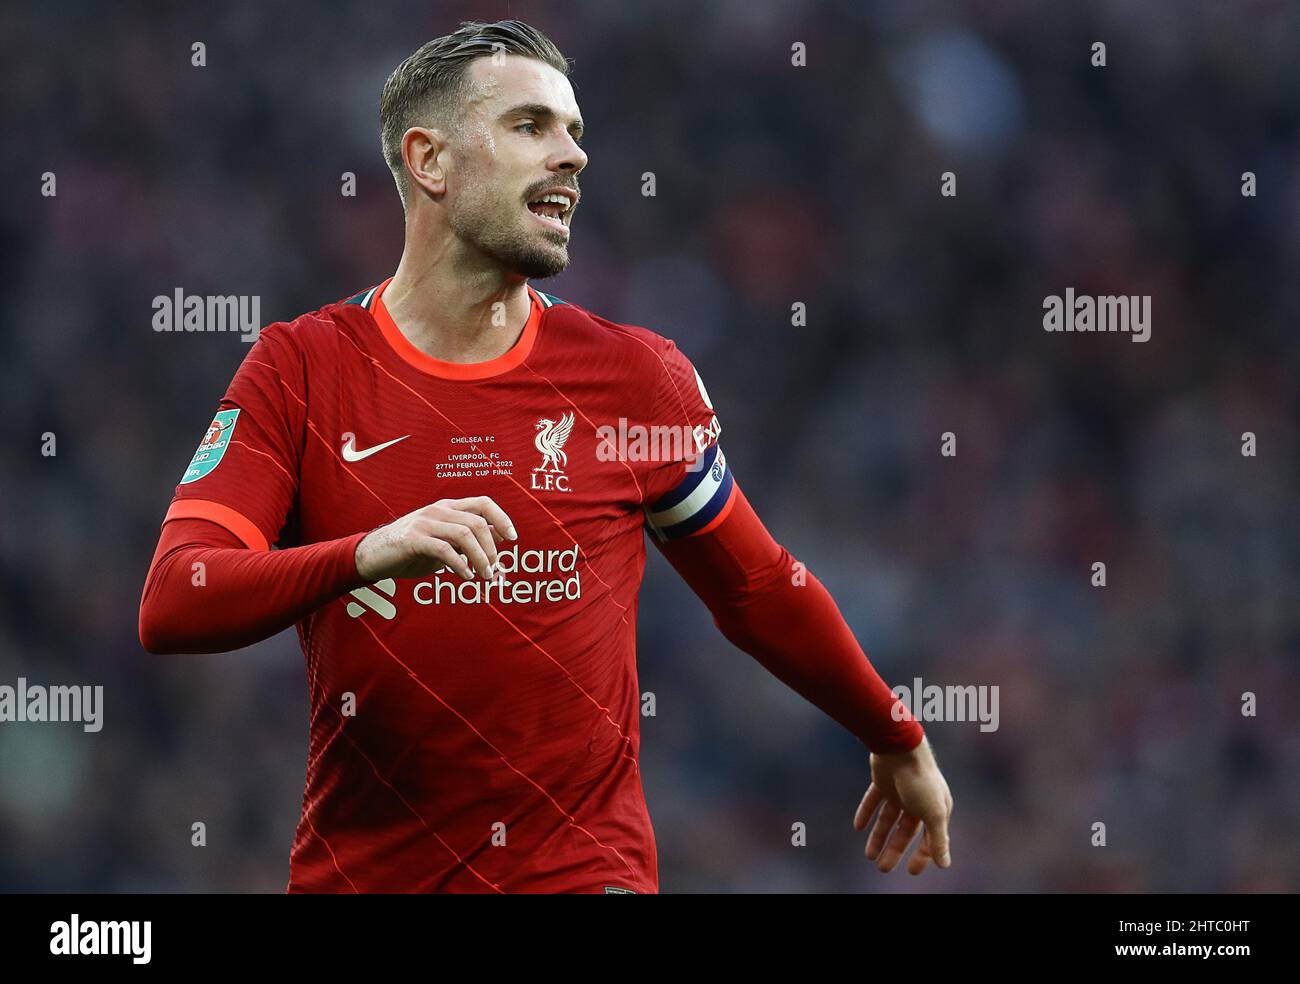 London, England, 27th February 2022. Jordan Henderson of Liverpool during the Carabao Cup match at Wembley Stadium, London. Picture credit should read: Paul Terry / Sportimage Credit: Sportimage/Alamy Live News Stock Photo